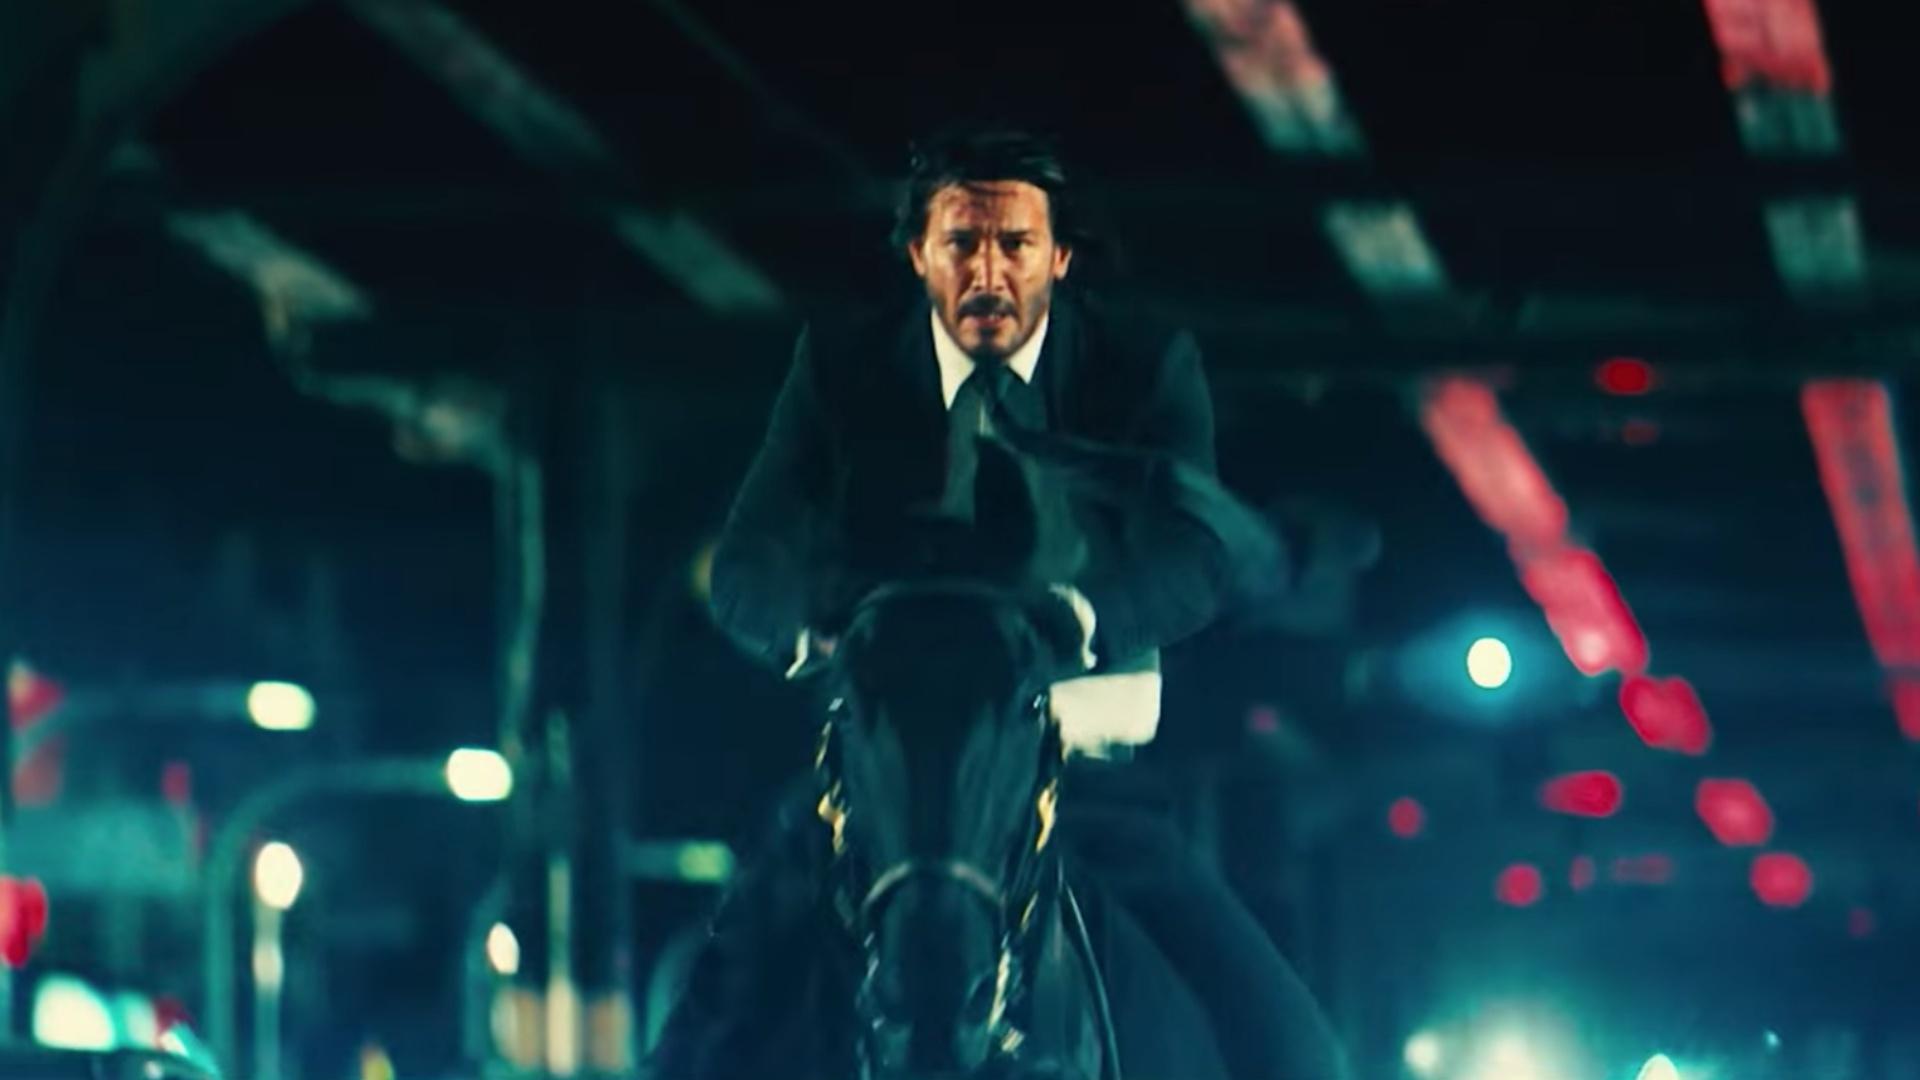 Keanu Reeves rides a horse in first John Wick: Chapter 3 trailer